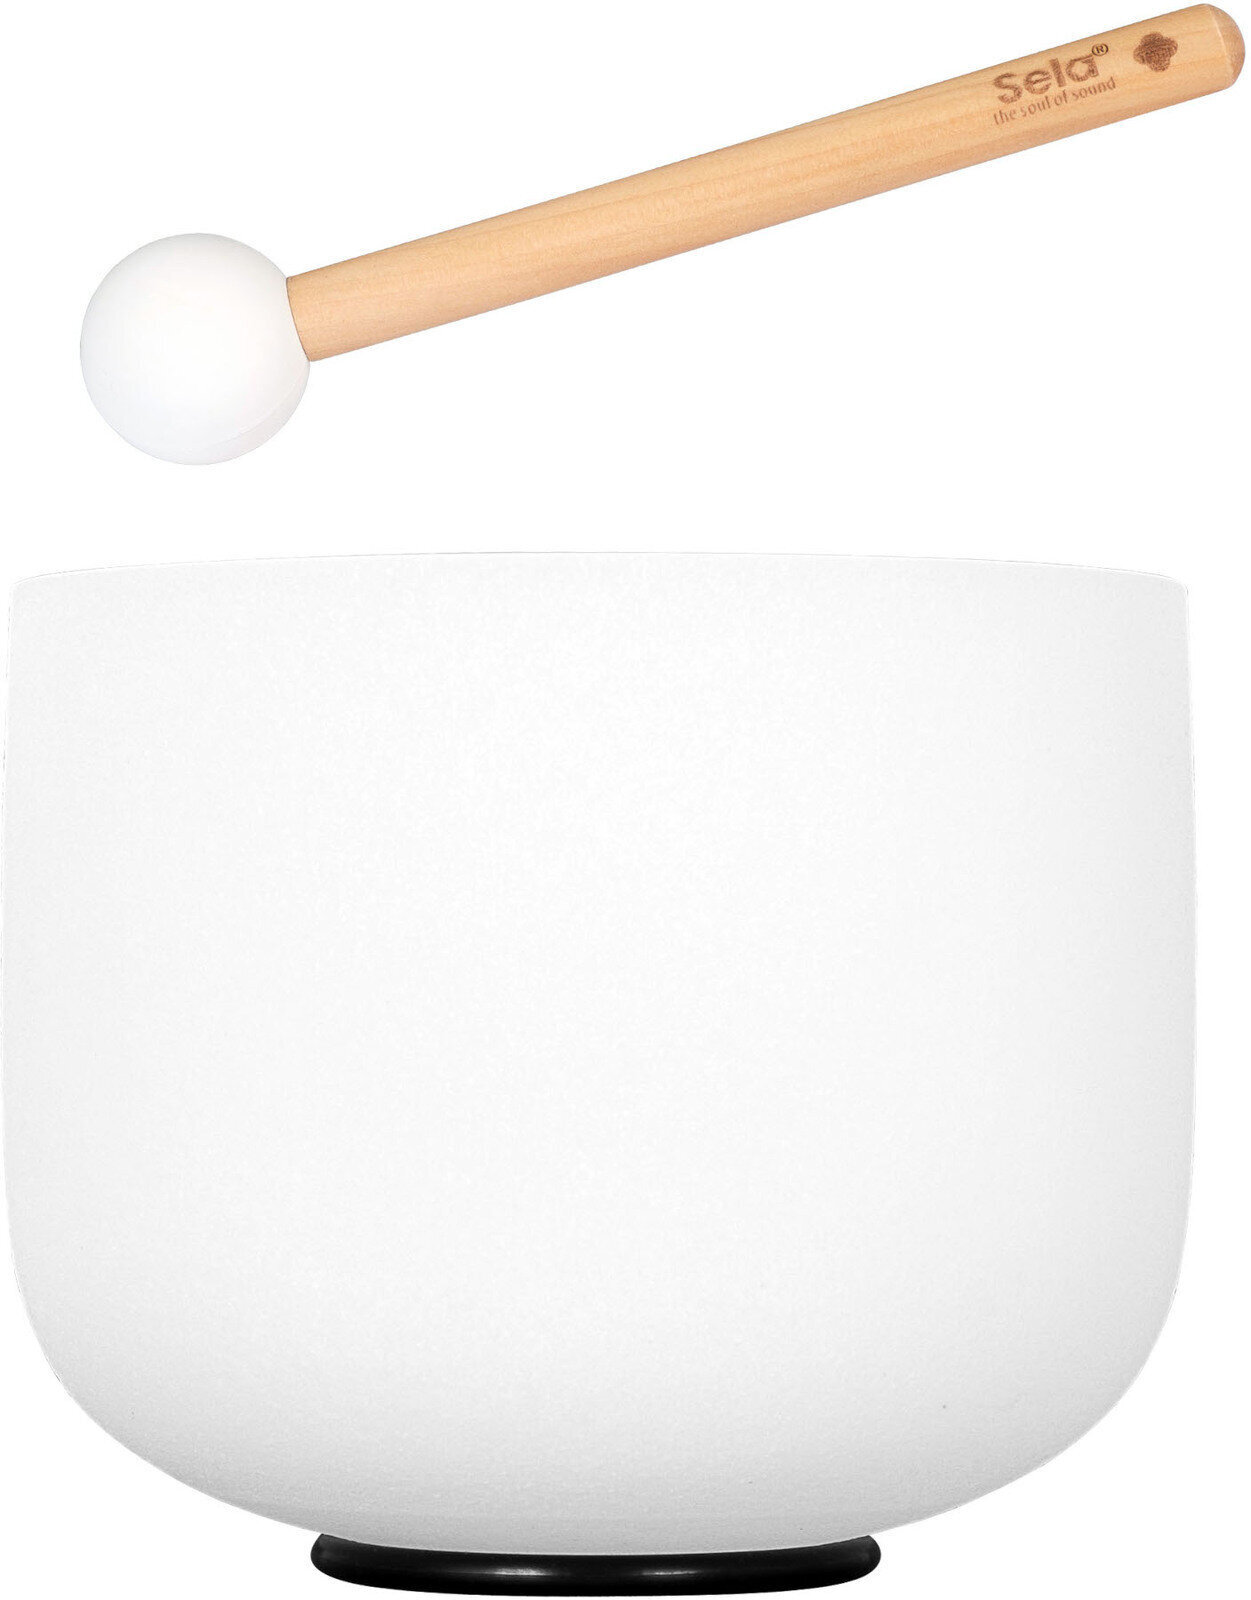 Percussion til musikterapi Sela 8" Crystal Singing Bowl Frosted 432 Hz F incl. 1 Wood Mallet